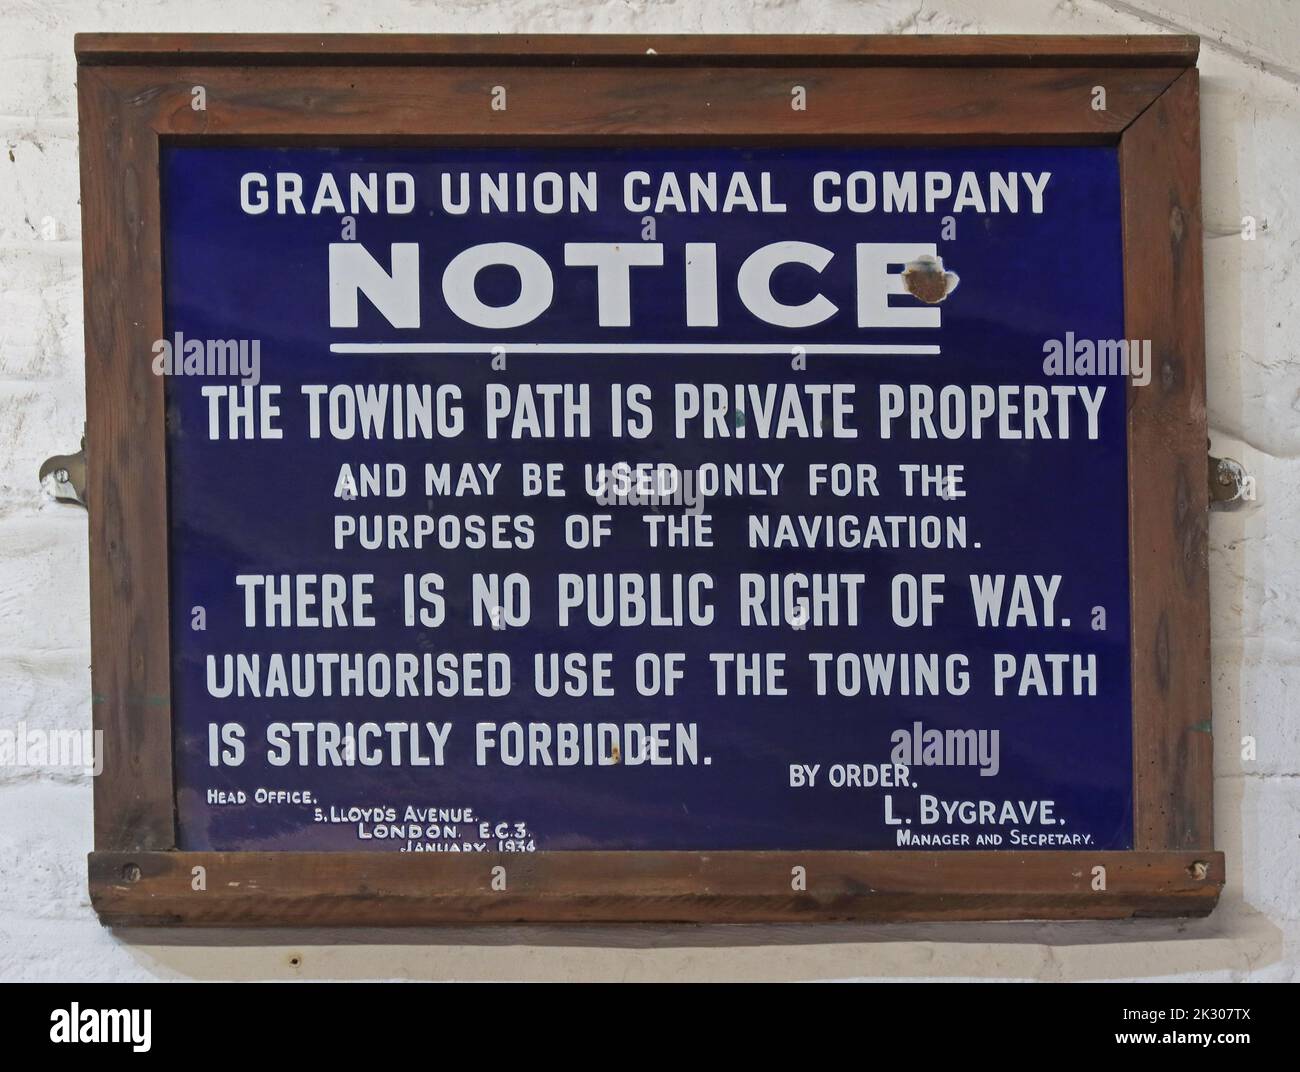 Blue framed Grand Union Canal Company Notice, The towing path is private property, and may be used only for the purposes of the navigation Stock Photo